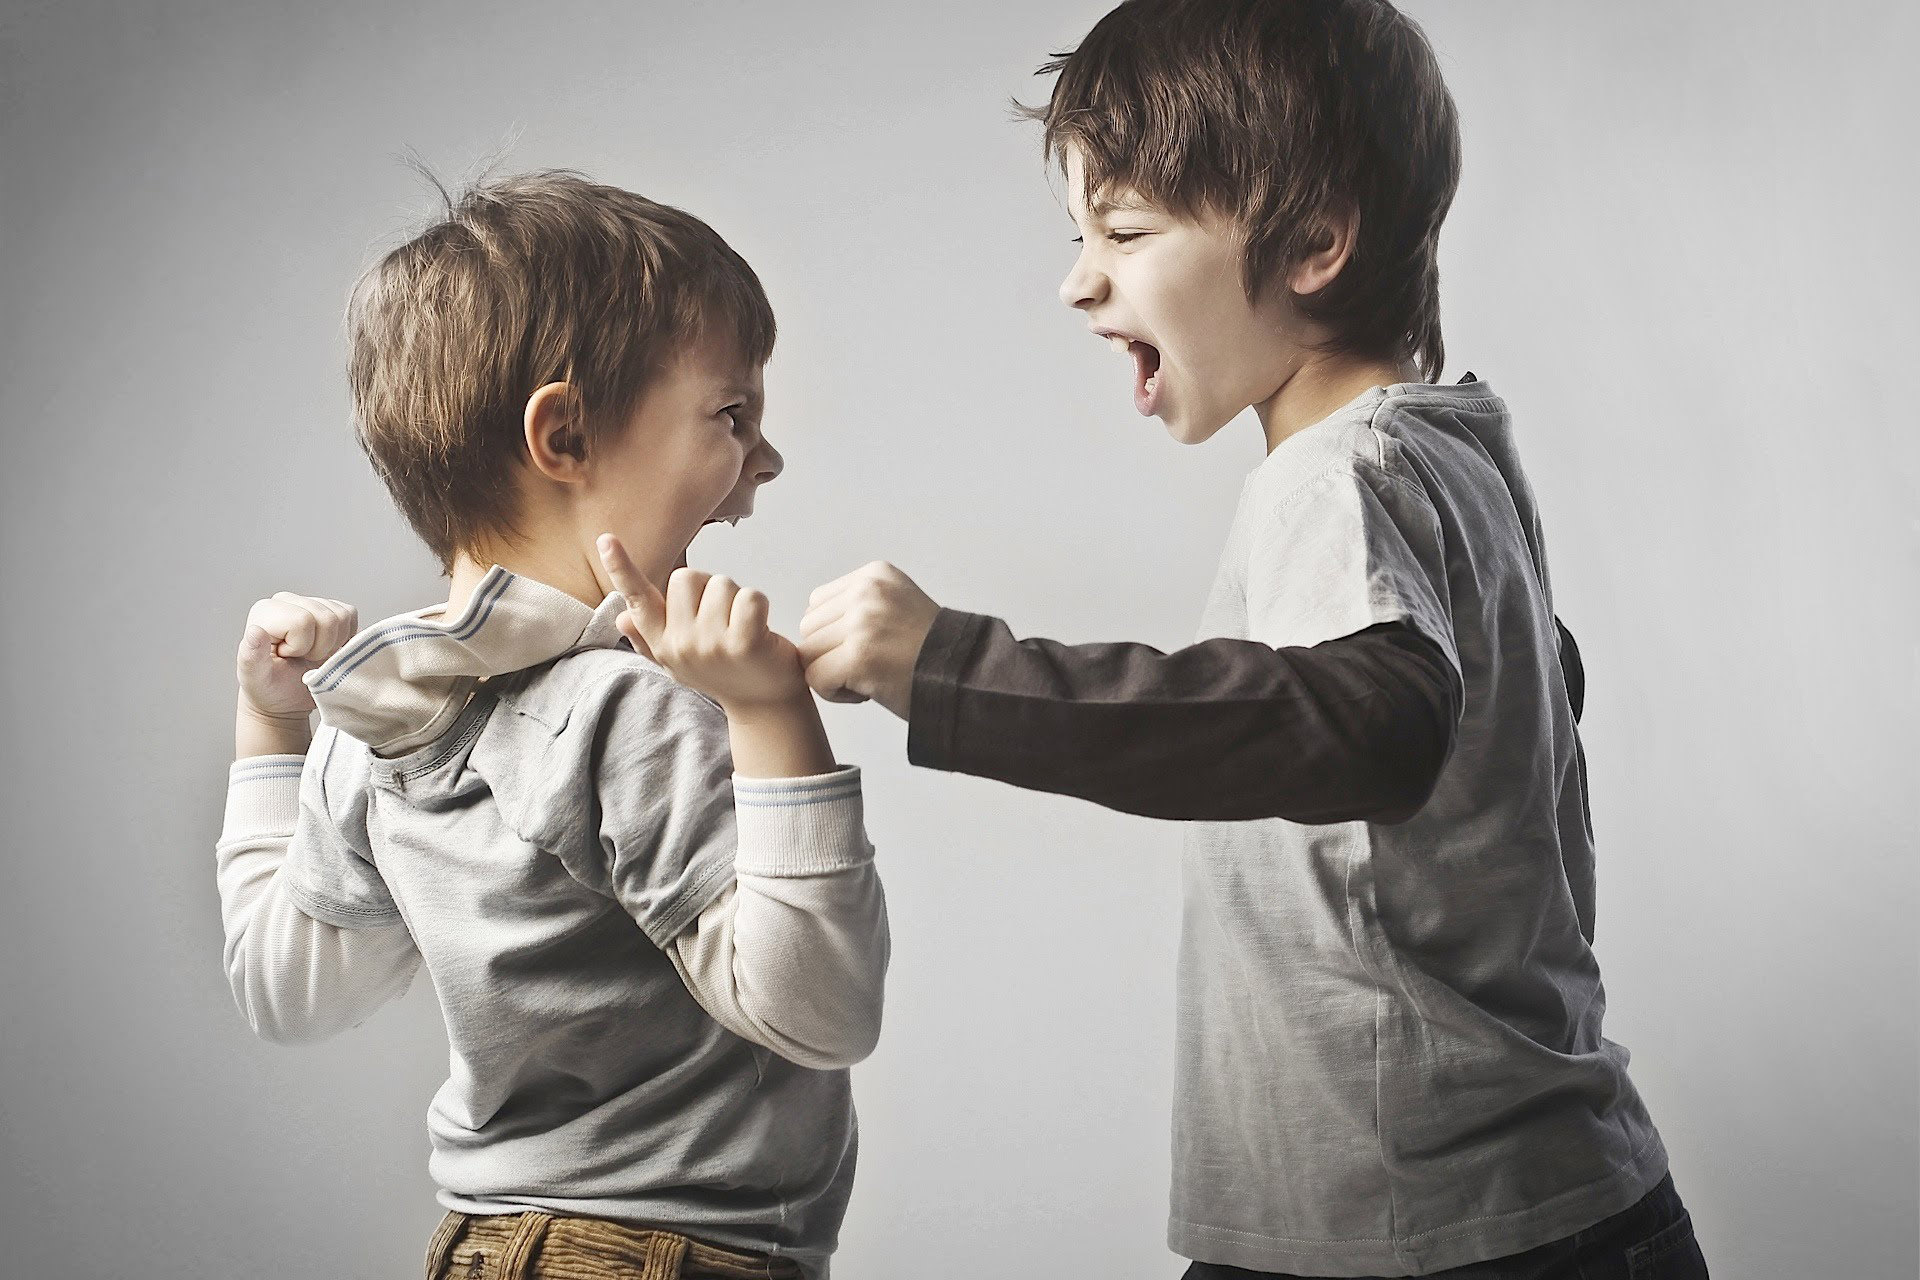 Children learn violence in the family #4